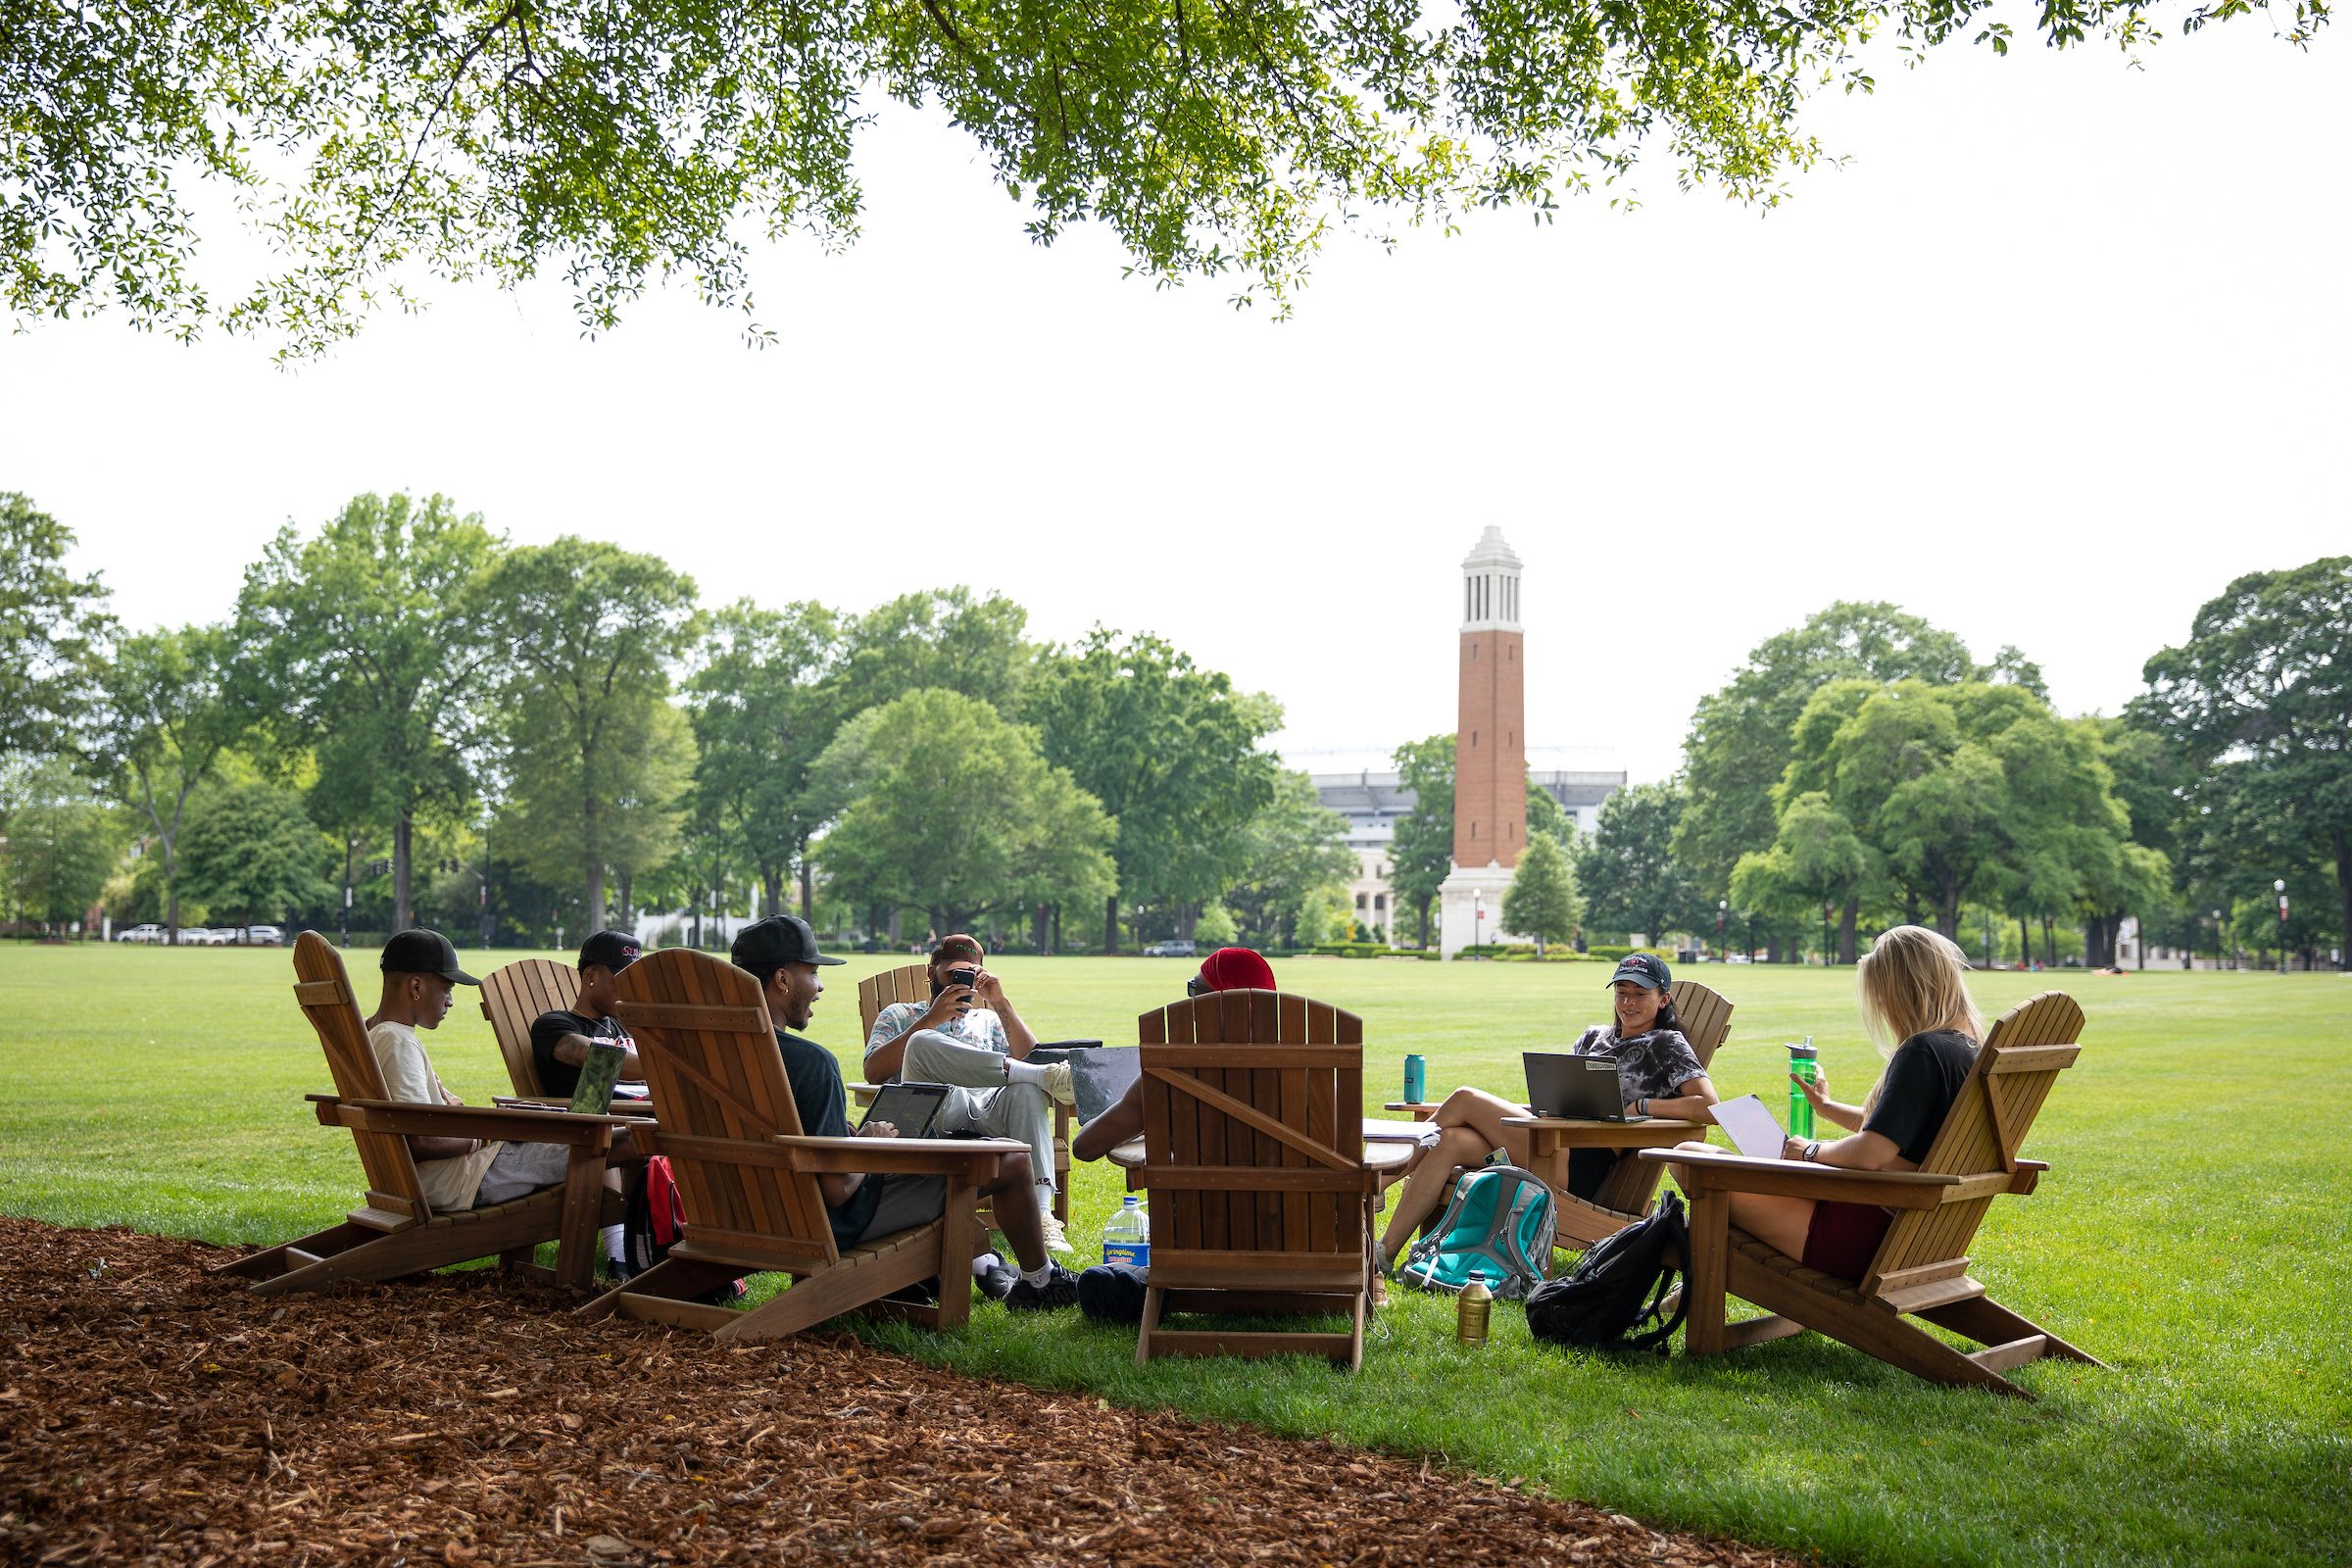 UA students relaxing in Adirondack chairs with Denny Chimes in the background